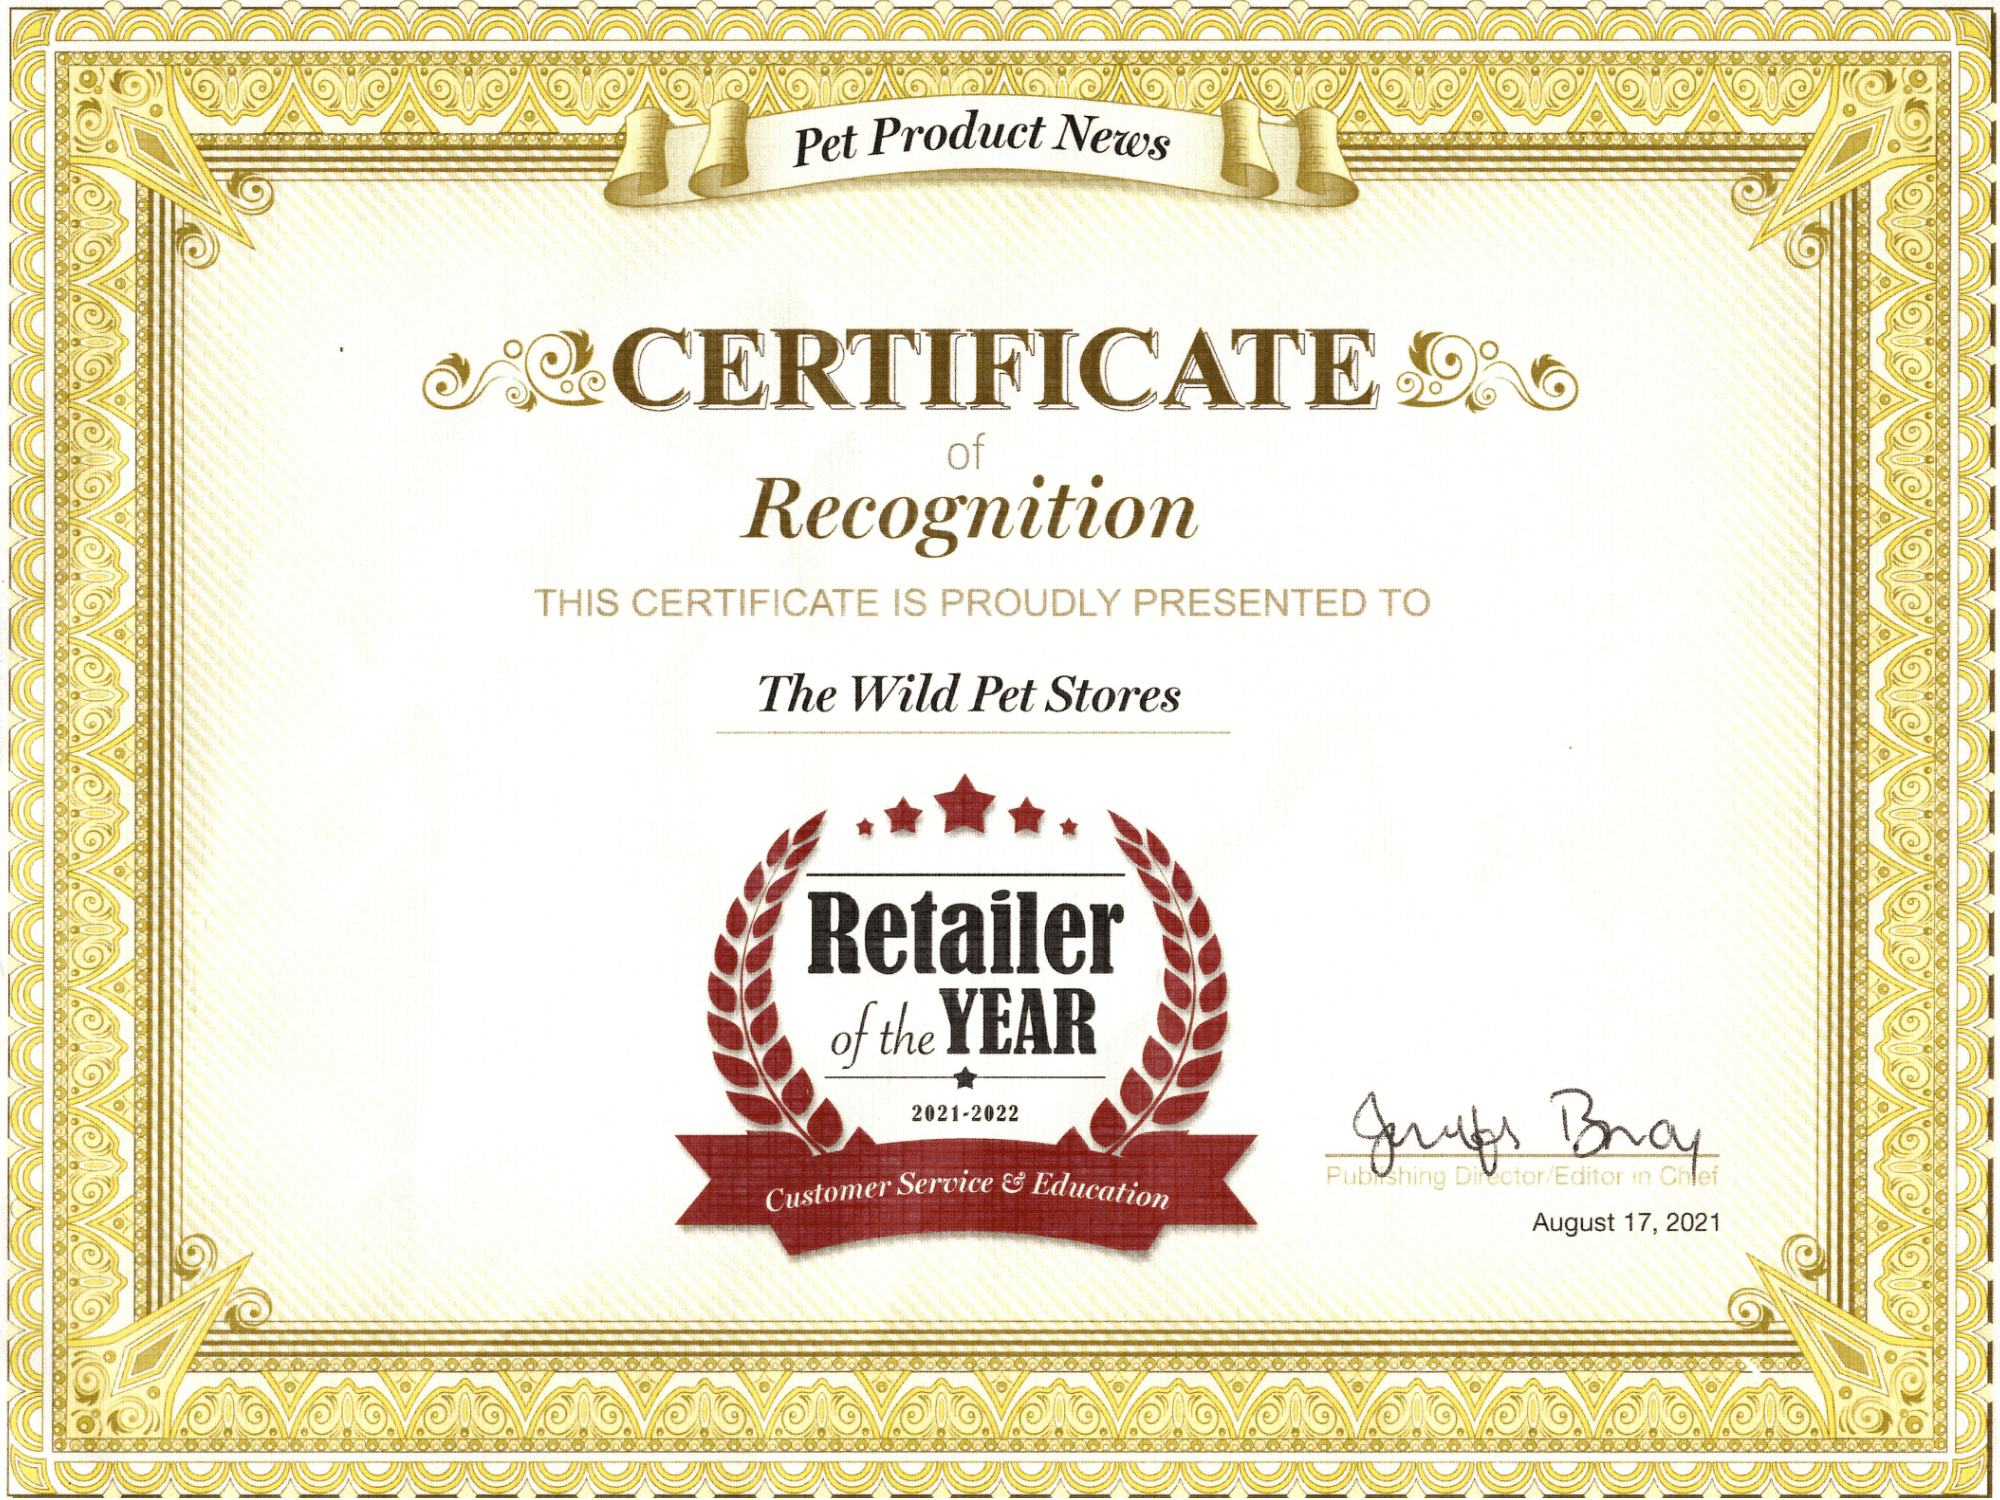 The Wild is One of Pet Product News' Retailers of the Year for 2021